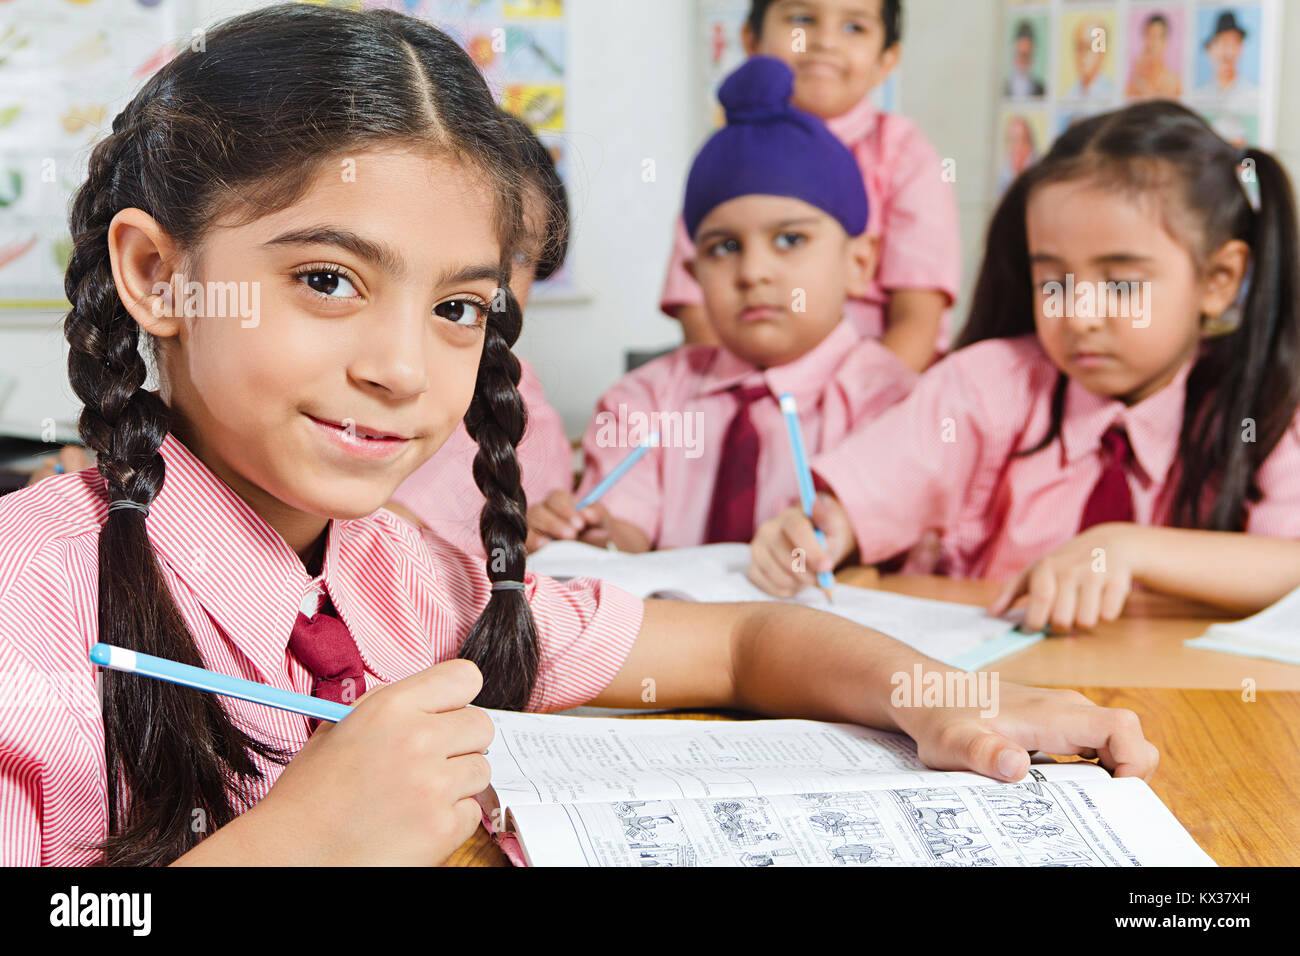 Indian School Childrens Students Notebook Writing Study In Class Stock Photo